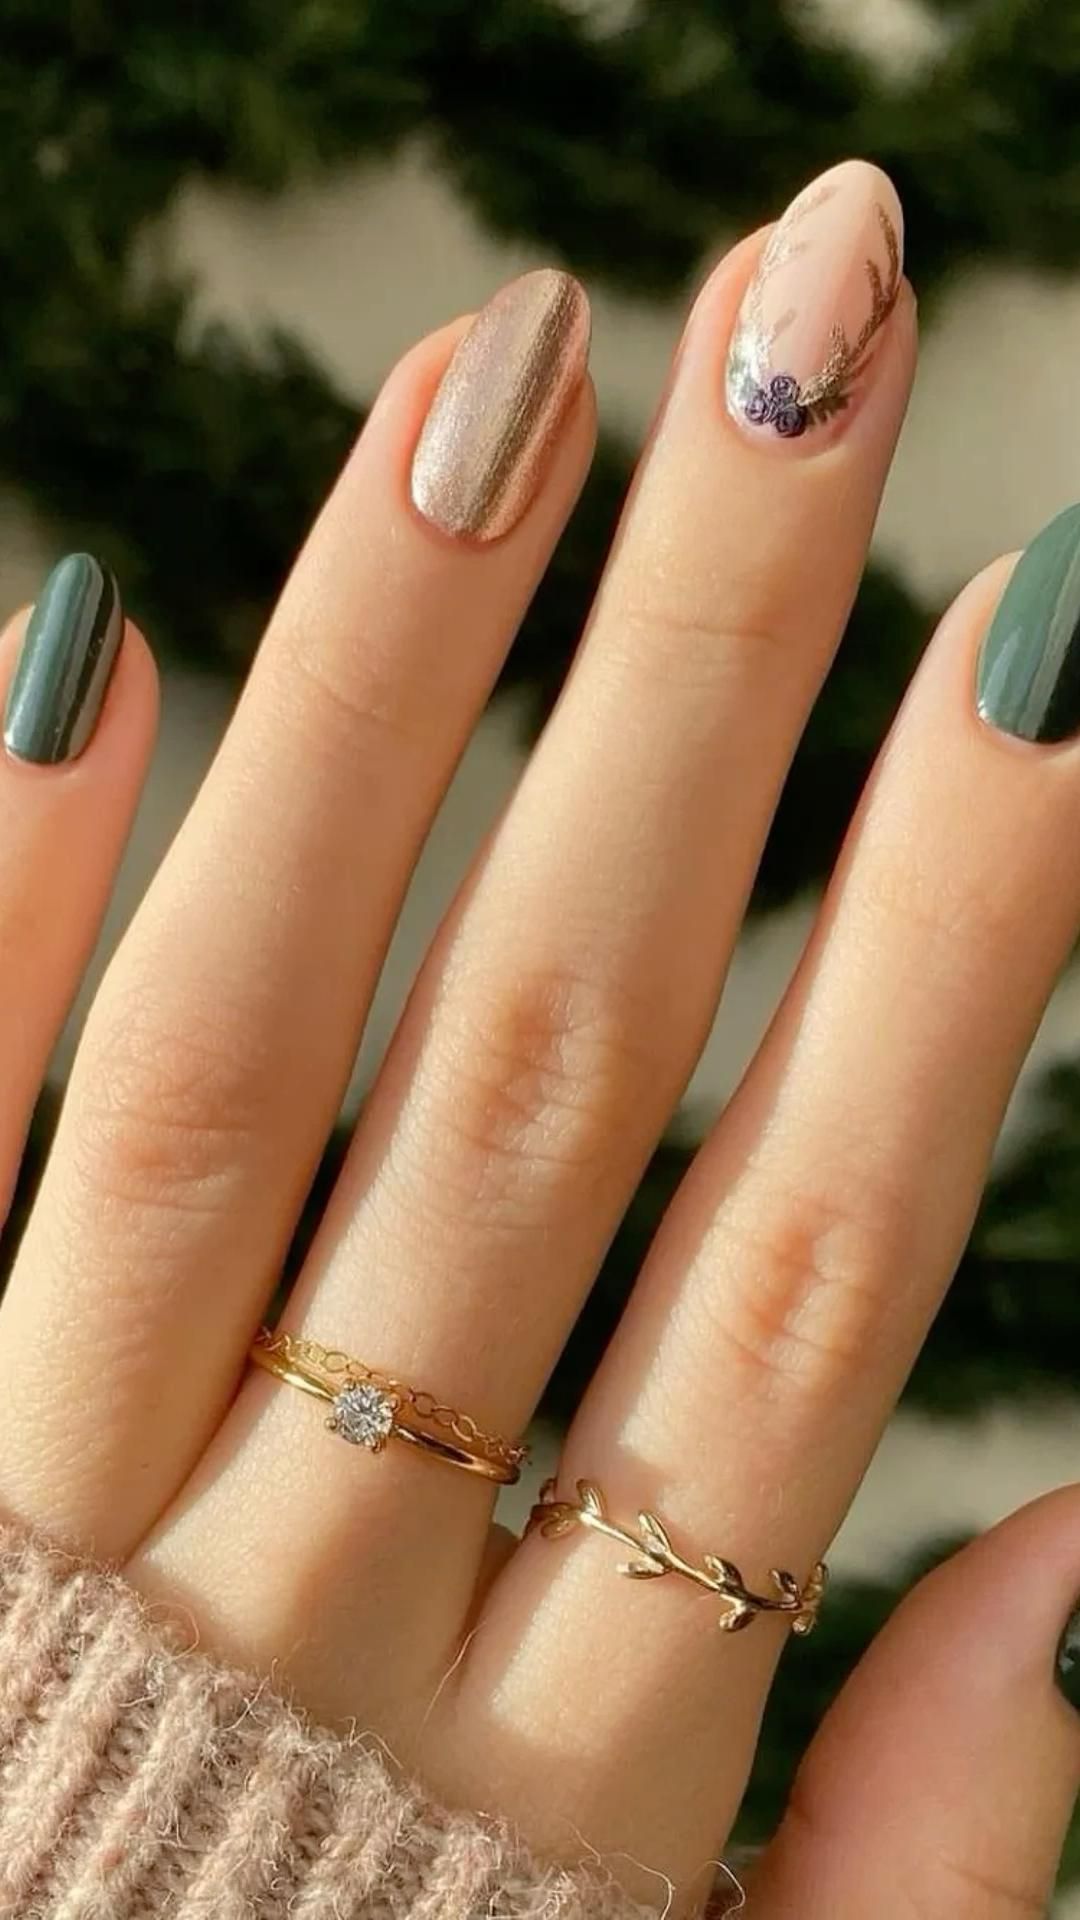 Get in the Holiday Spirit with Festive Plaid Nail Art